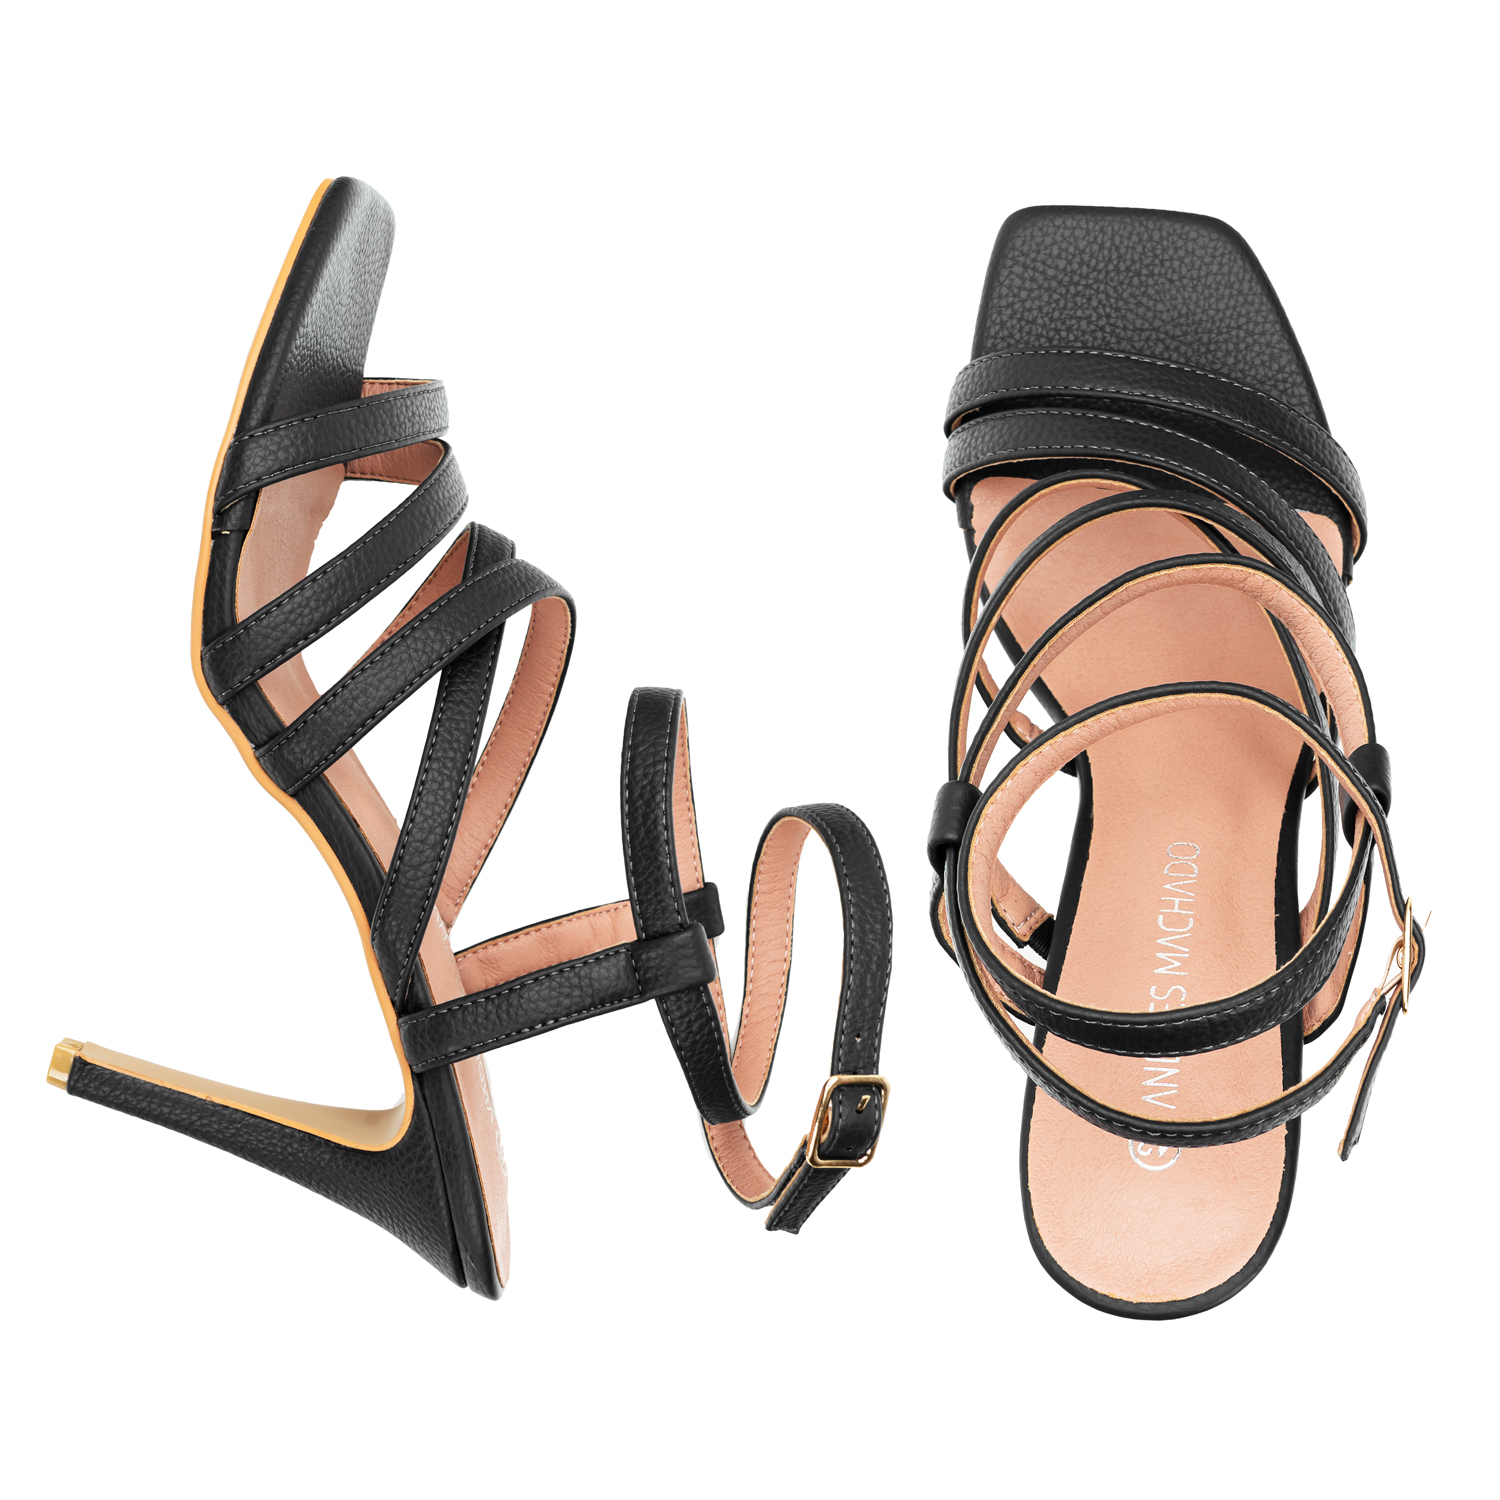 Black Faux Leather Strappy Sandals 